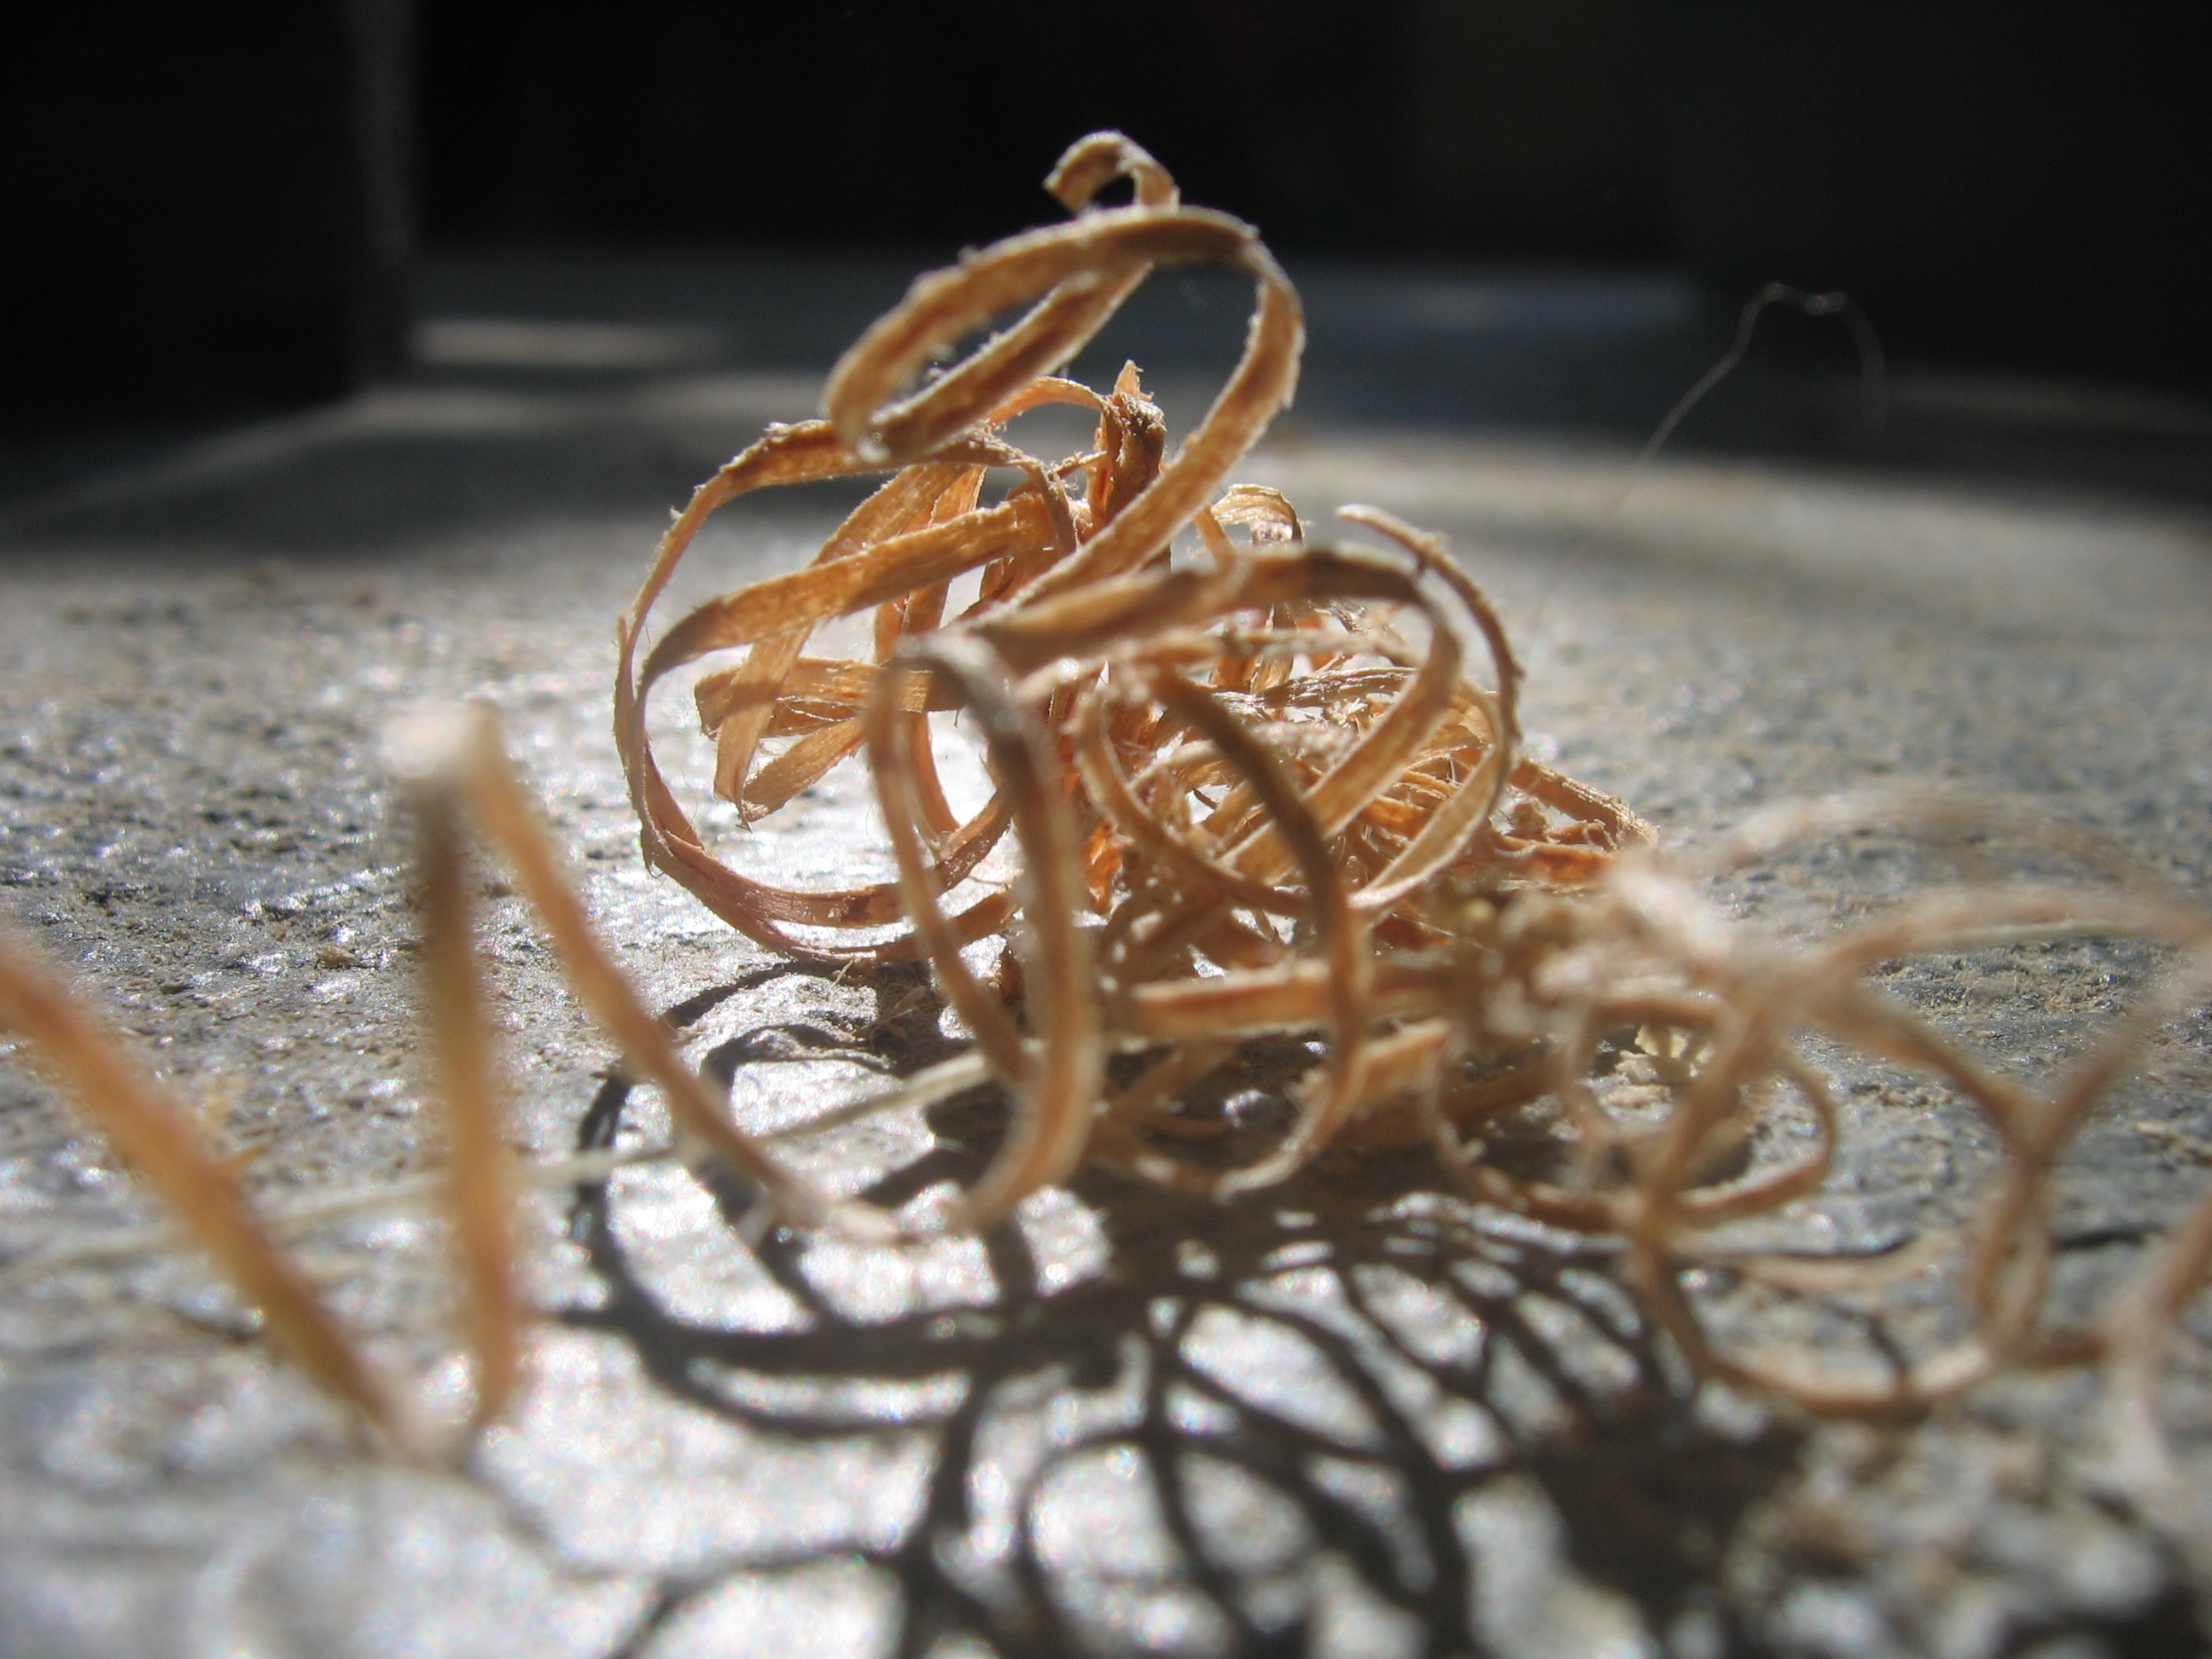 Wood shavings, Abstract, Carpenter, Carpentry, Curl, HQ Photo